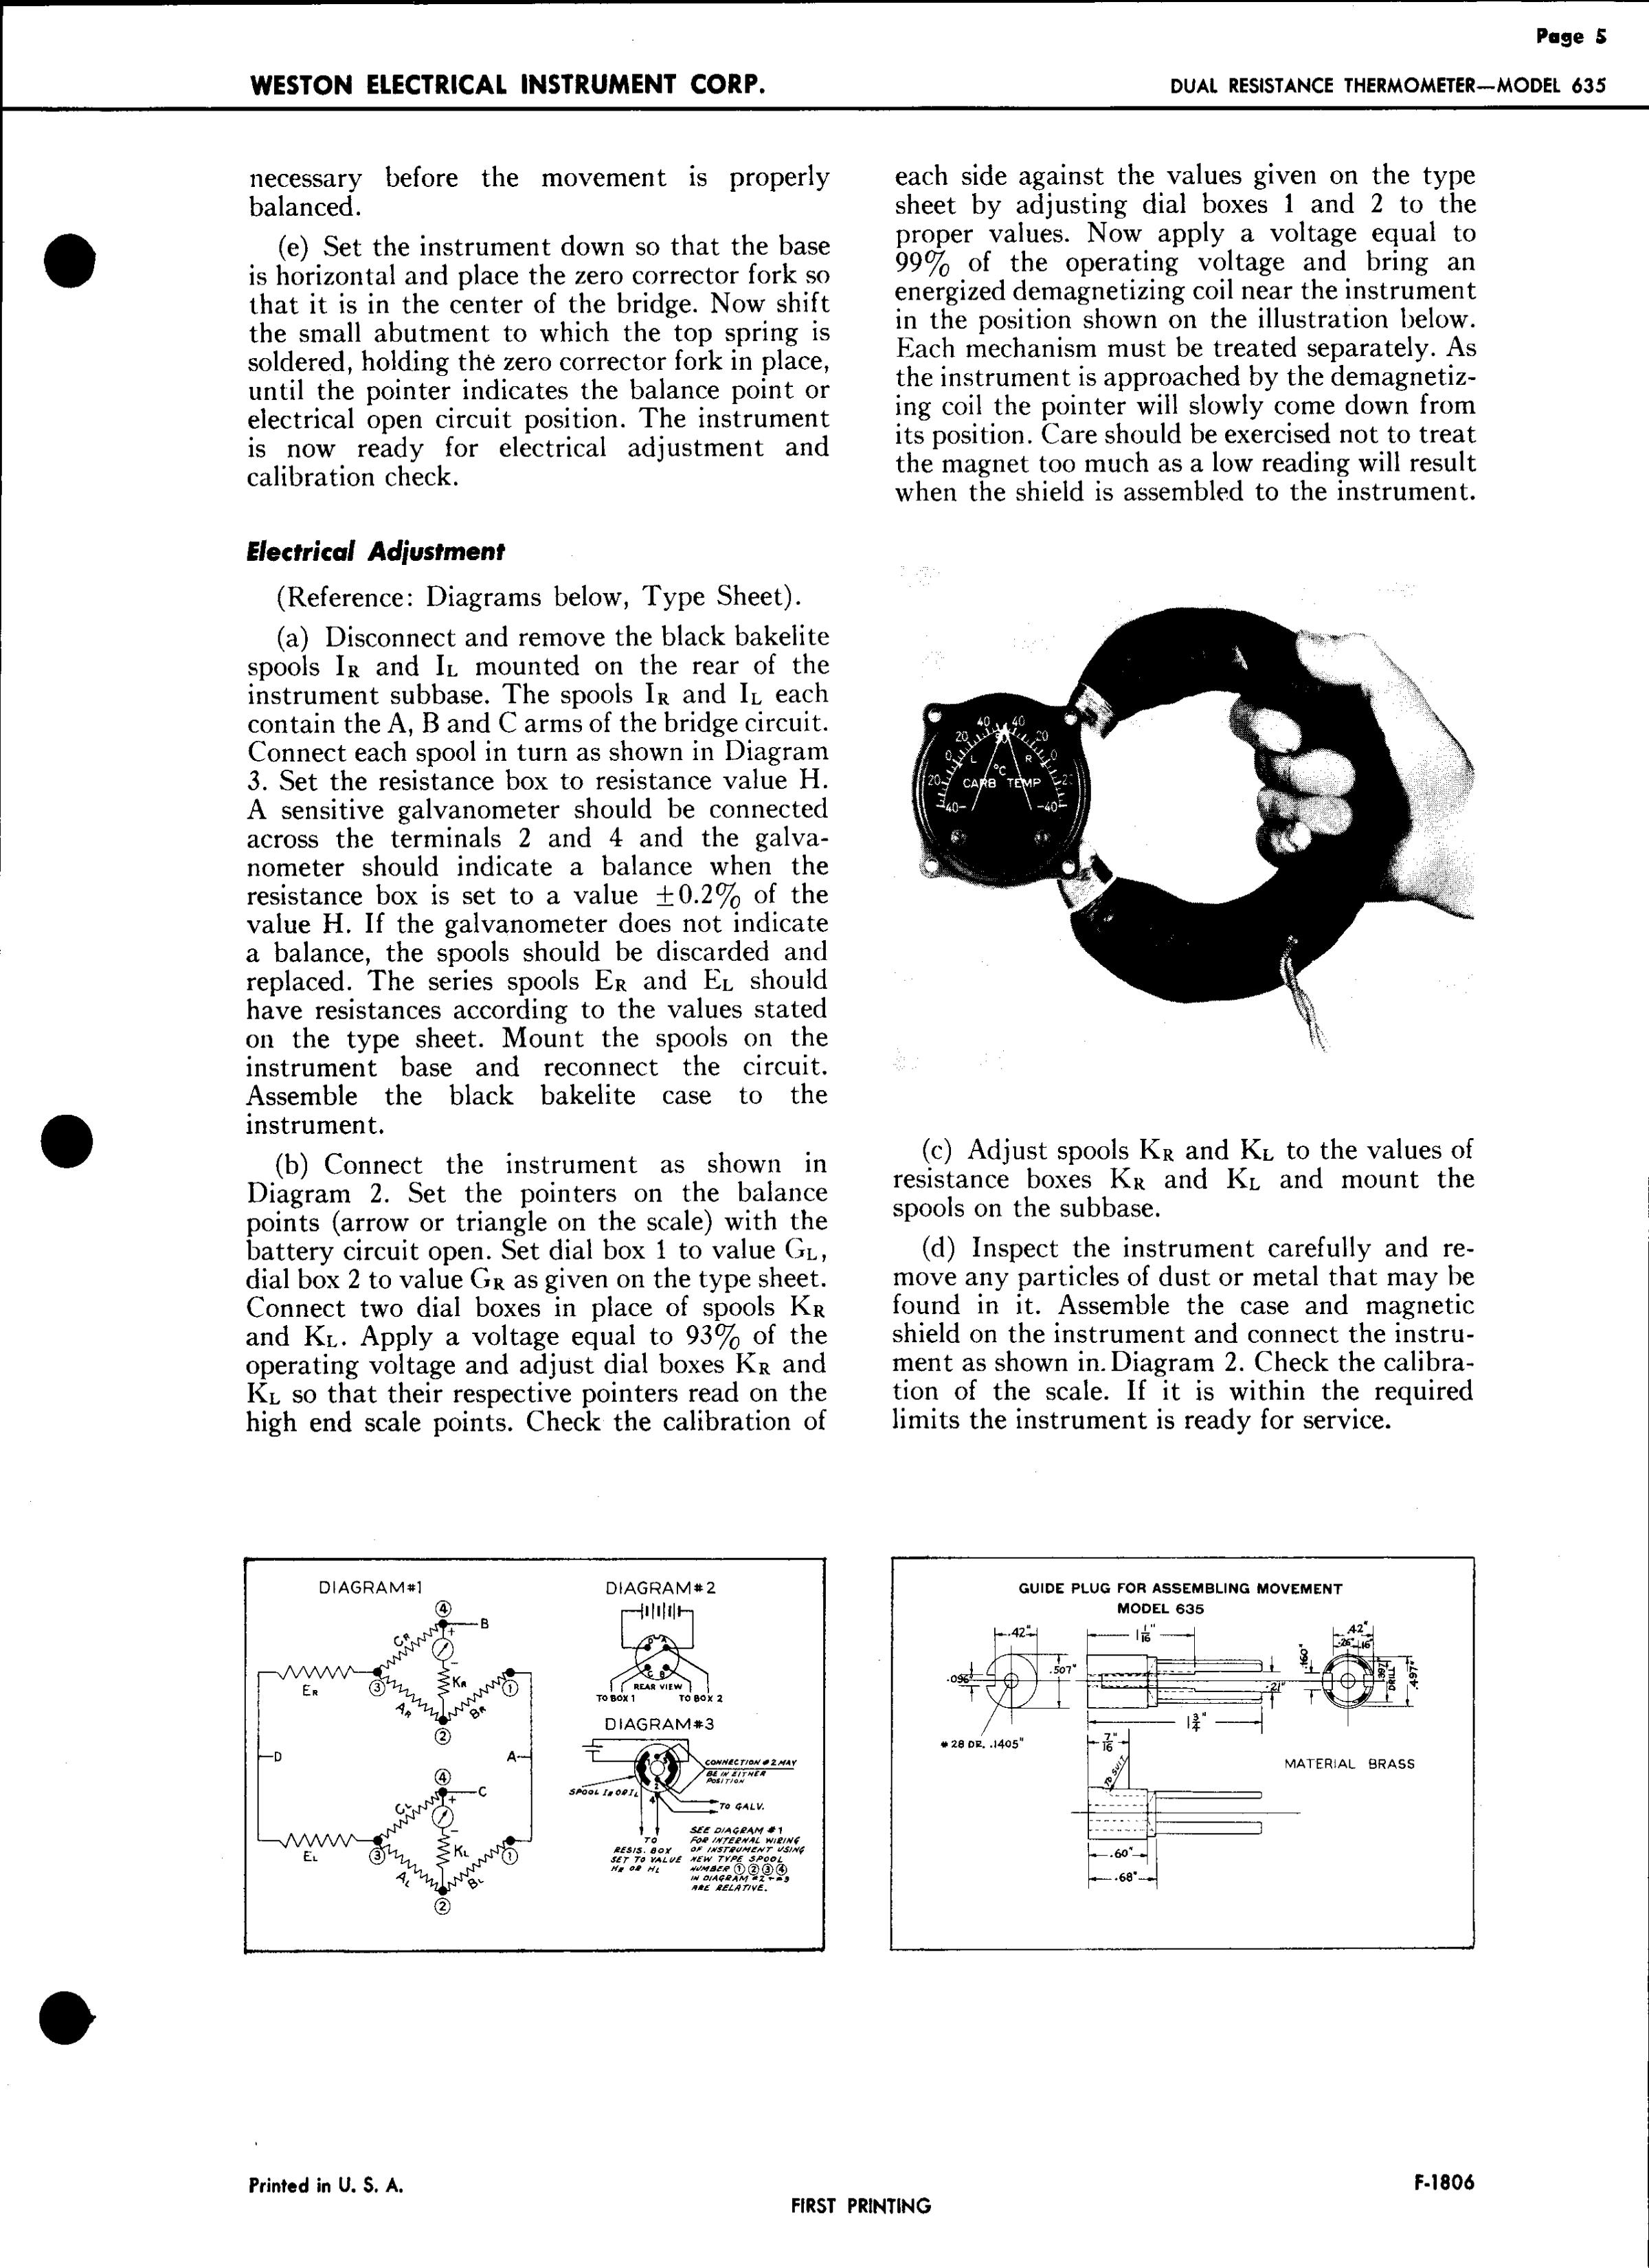 Sample page 5 from AirCorps Library document: Service Instructions for Model 35 Dual Resistance Thermometer